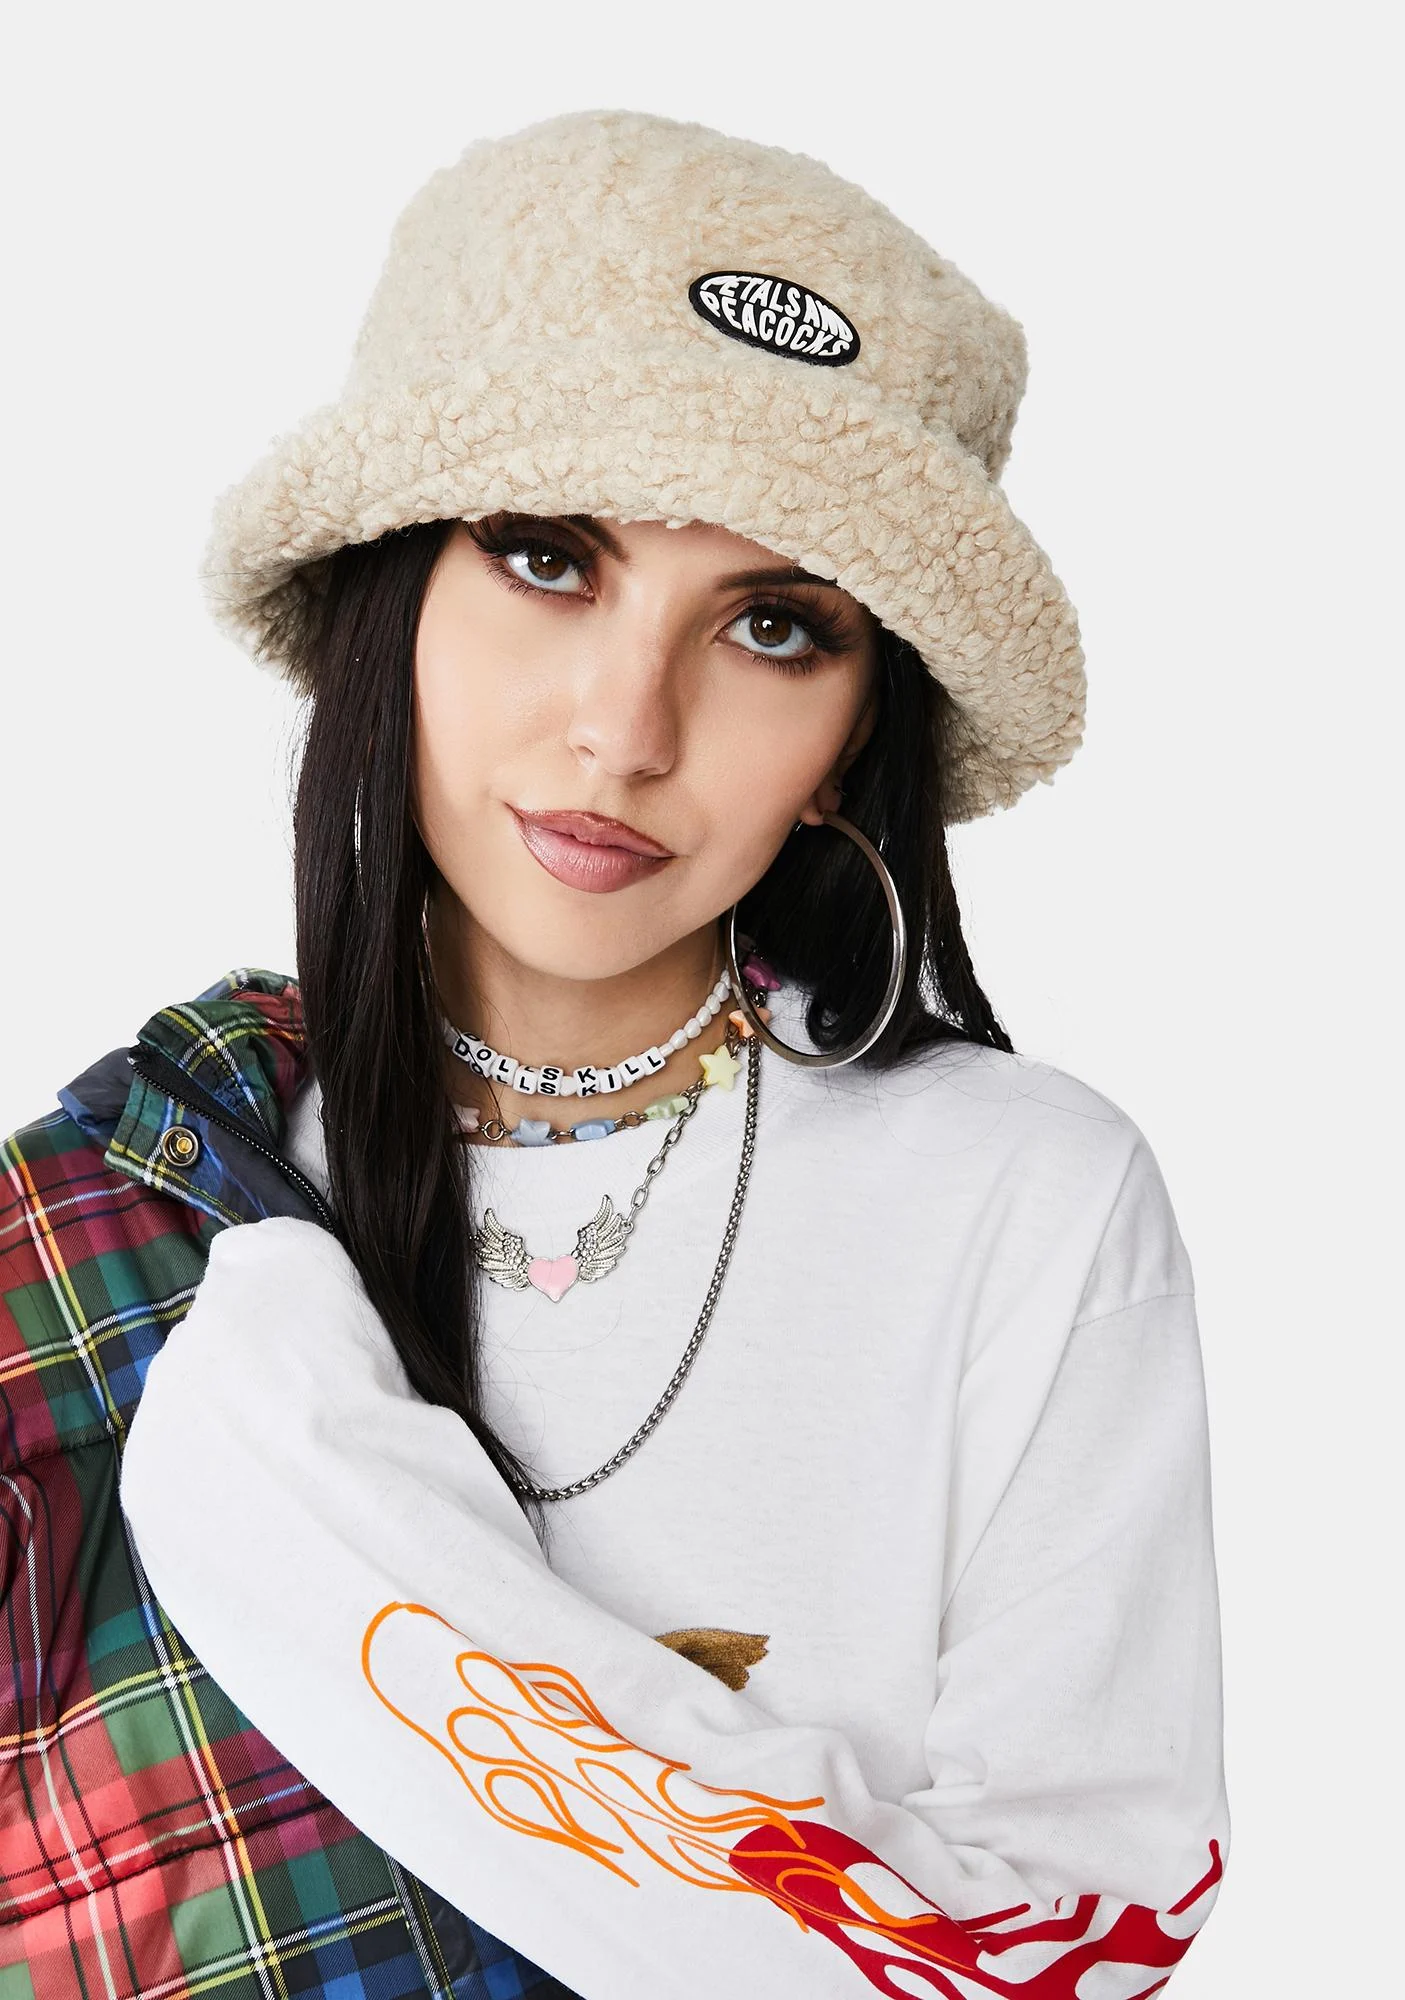 21 Bucket Hat Outfit ideas  bucket hat outfit, outfits with hats